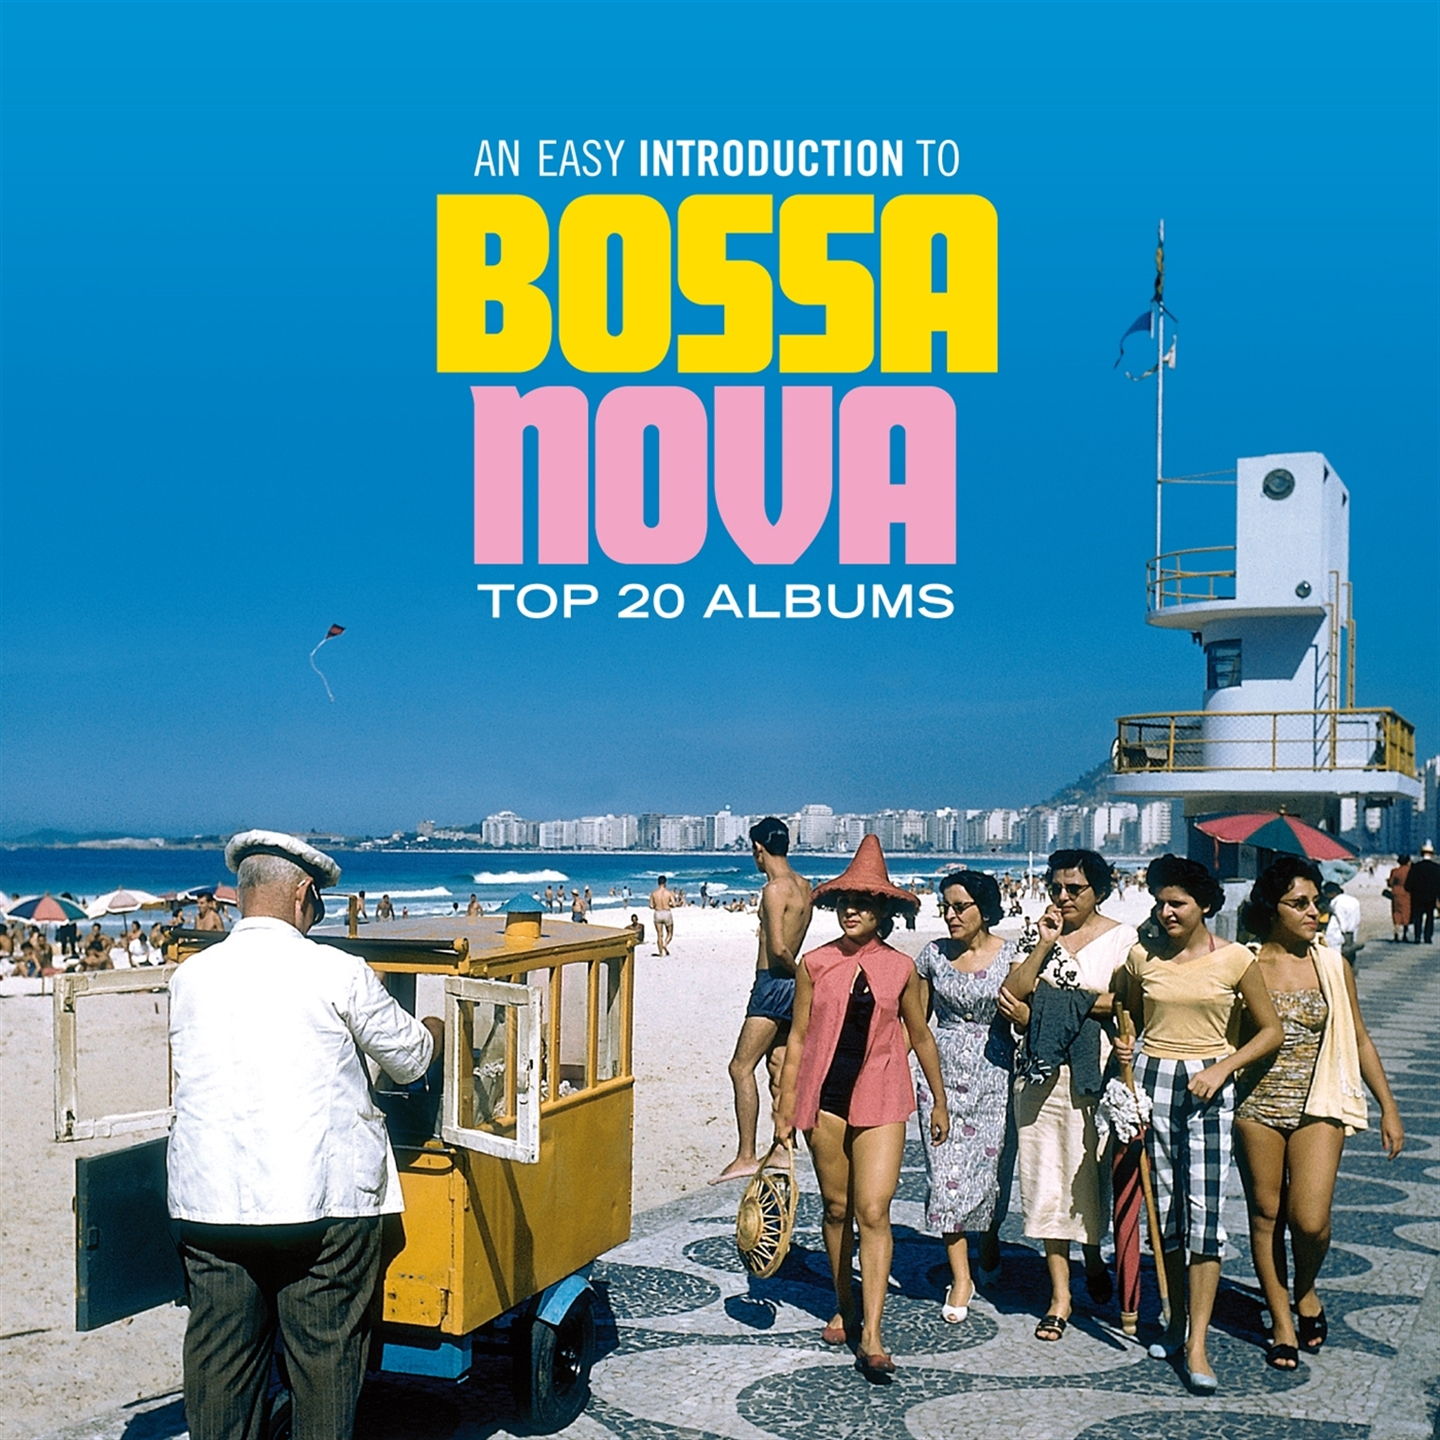 AN EASY INTRODUCTION TO BOSSA NOVA - TOP 20 ALBUMS